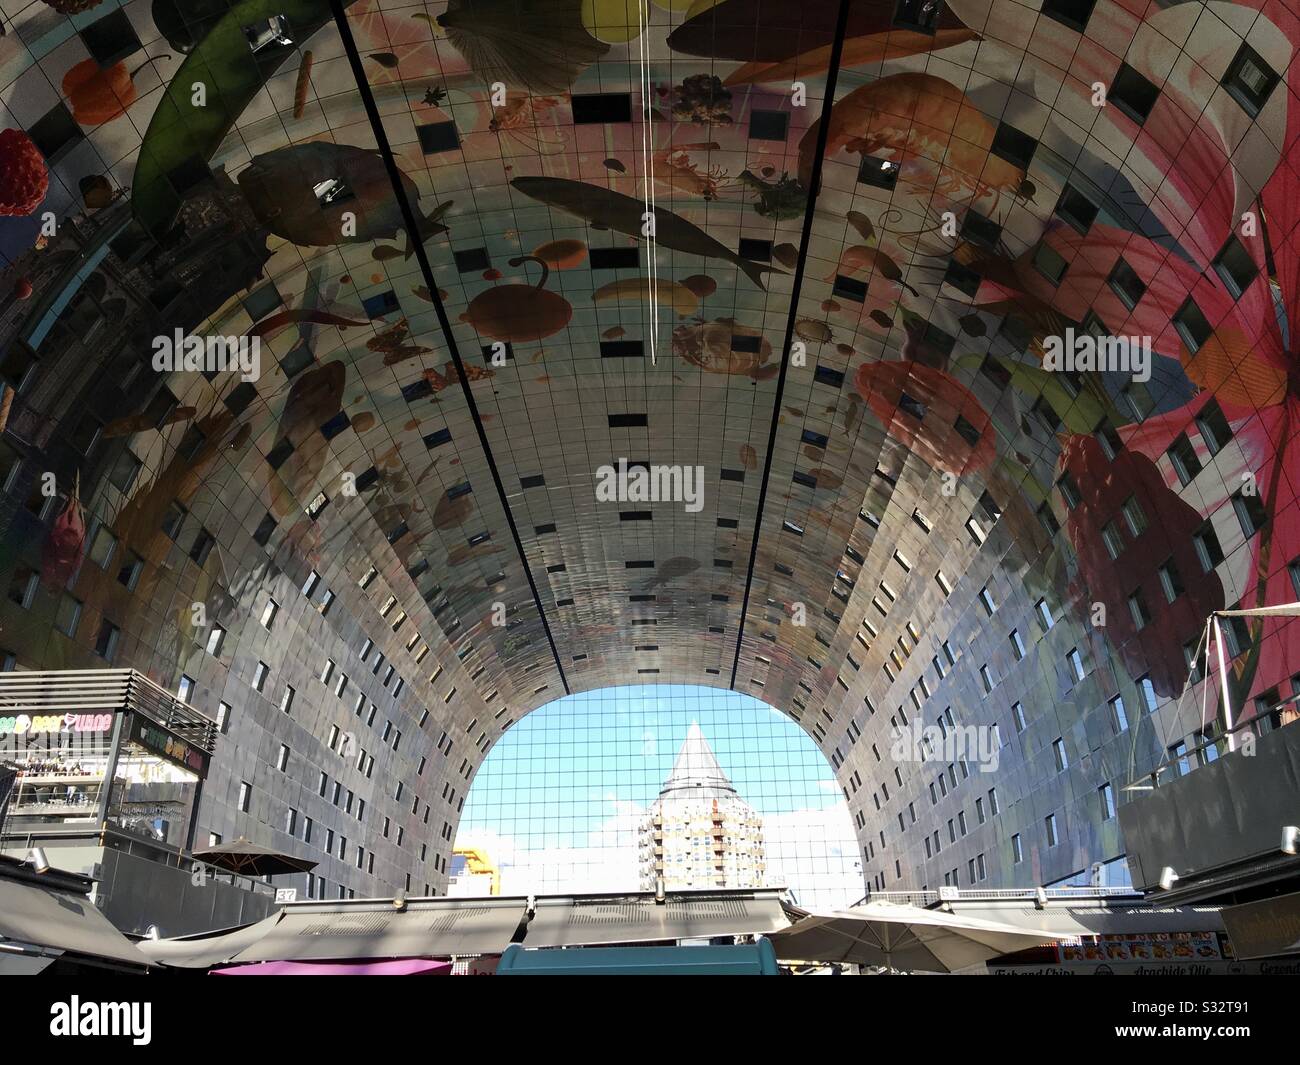 Local Market called Markthal in Rotterdam The Netherlands Stock Photo